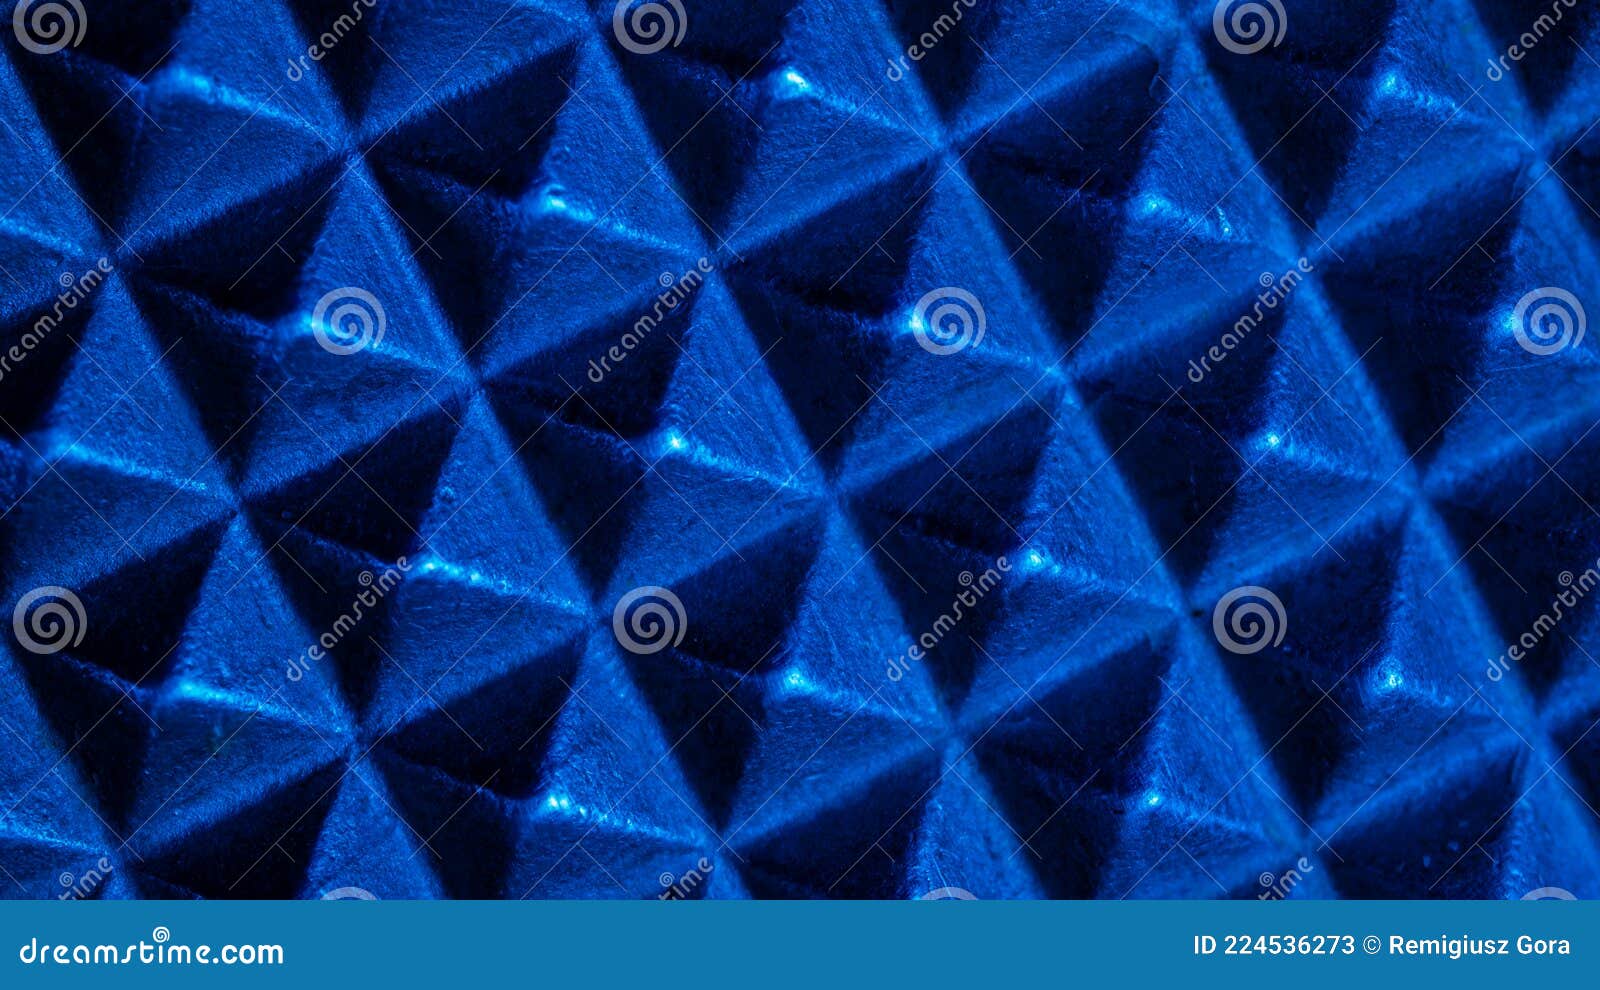 blue texture macro photo of the pyramids on tapete